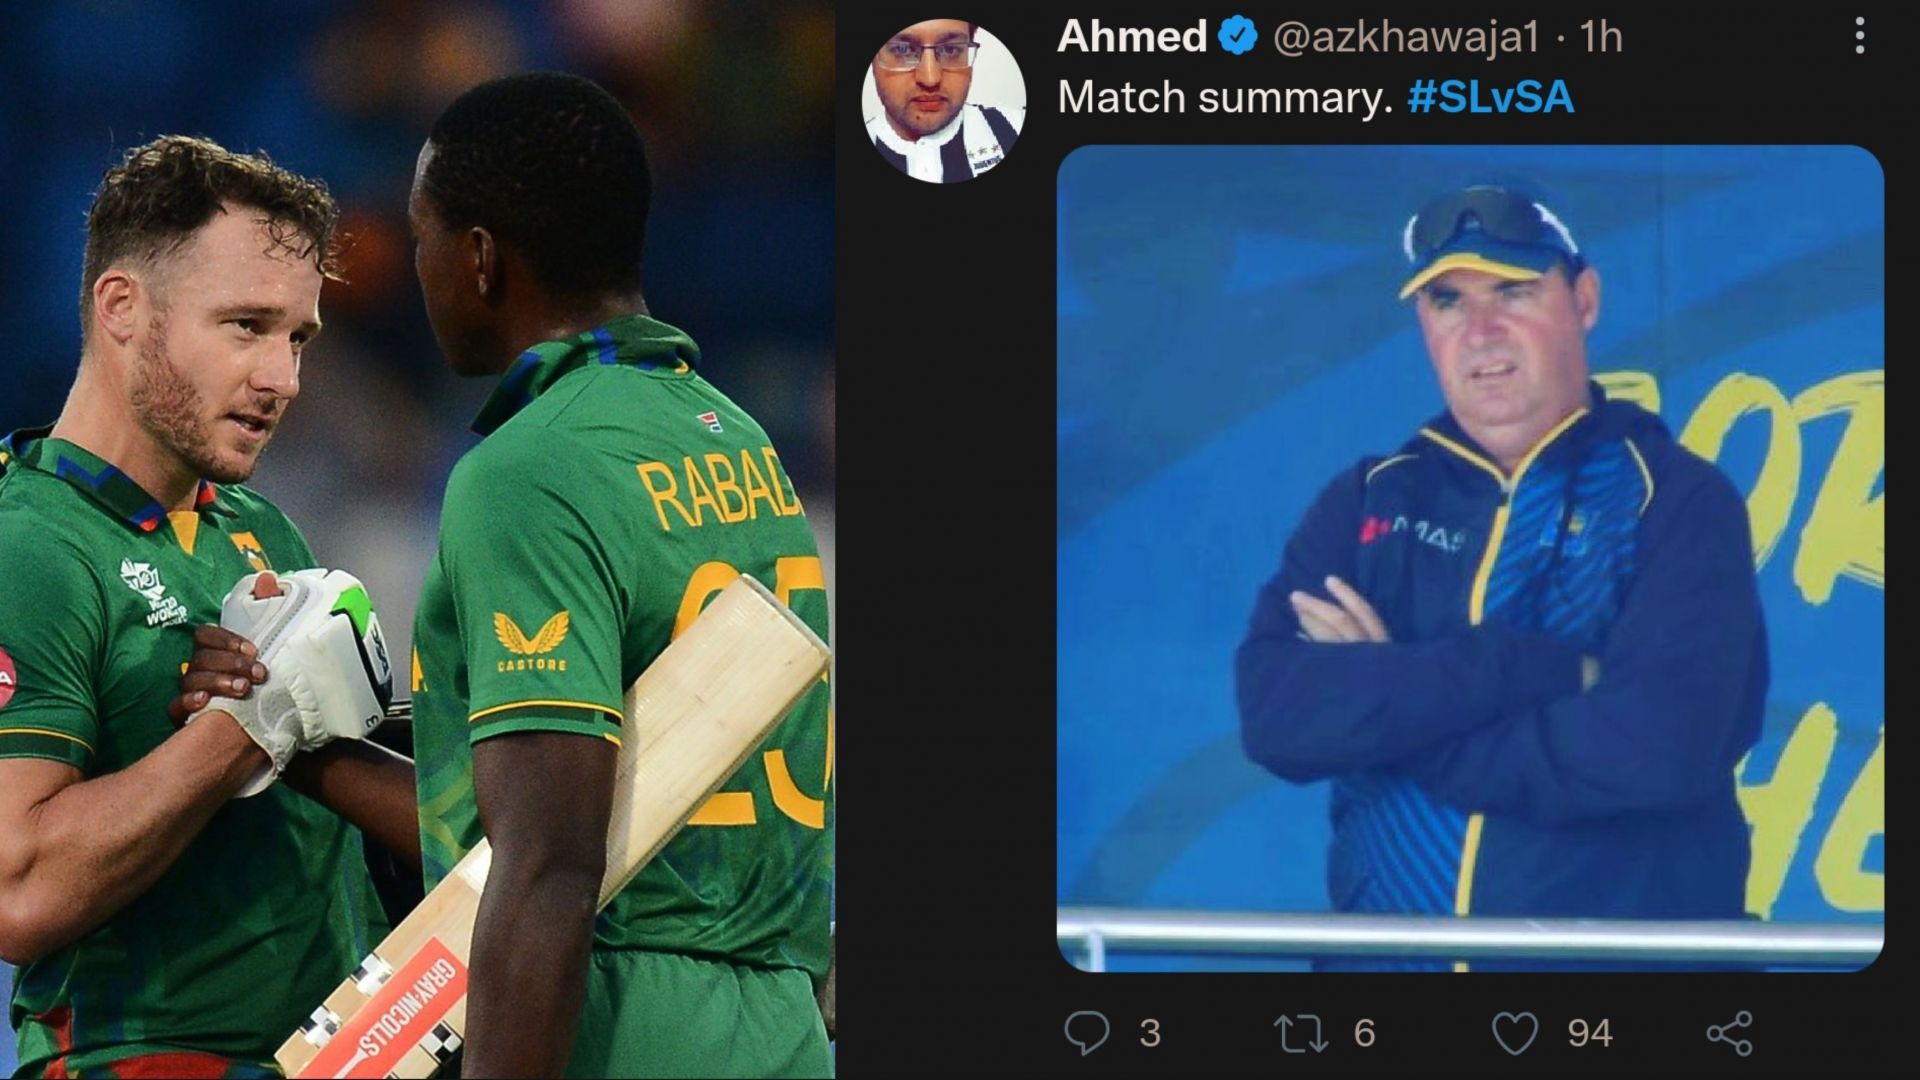 David Miller and Kagiso Rabada helped South Africa register a memorable win in the ICC T20 World Cup 2021.